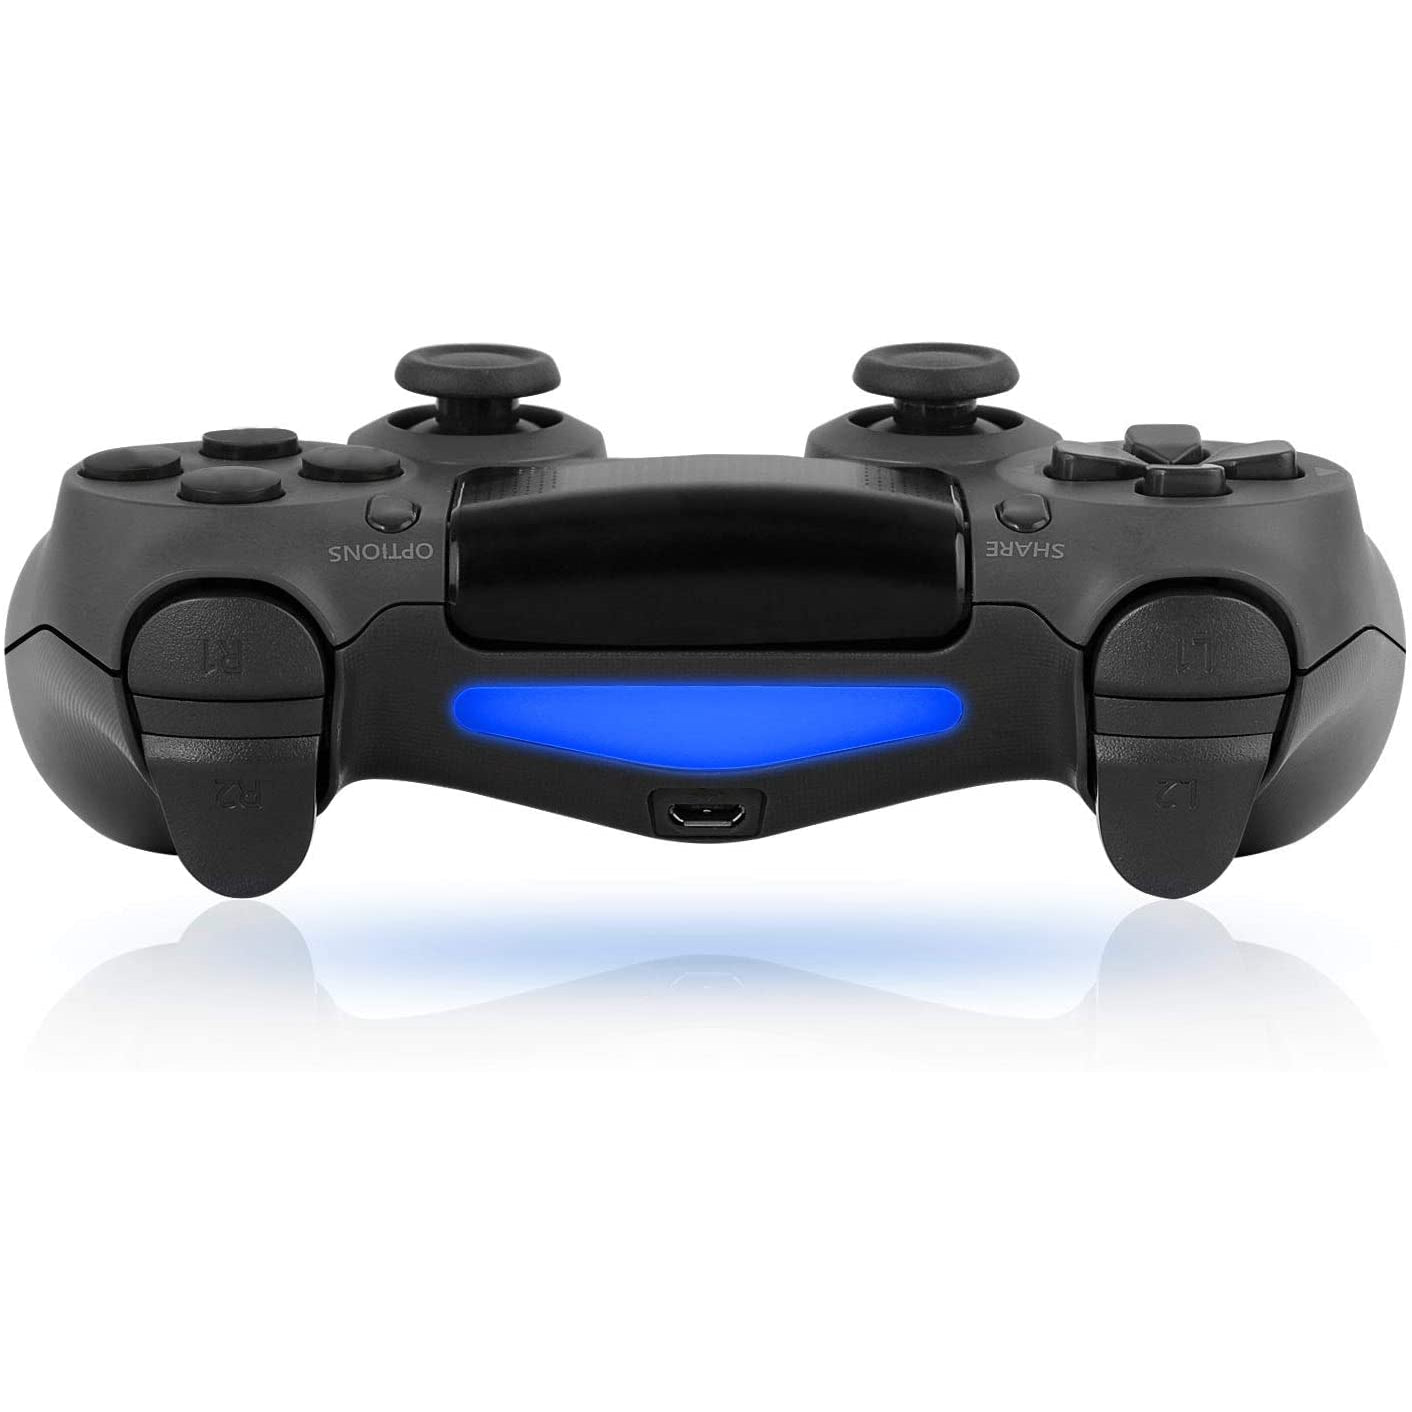 Doubleshock 4 PS4 Wireless Controller - Black